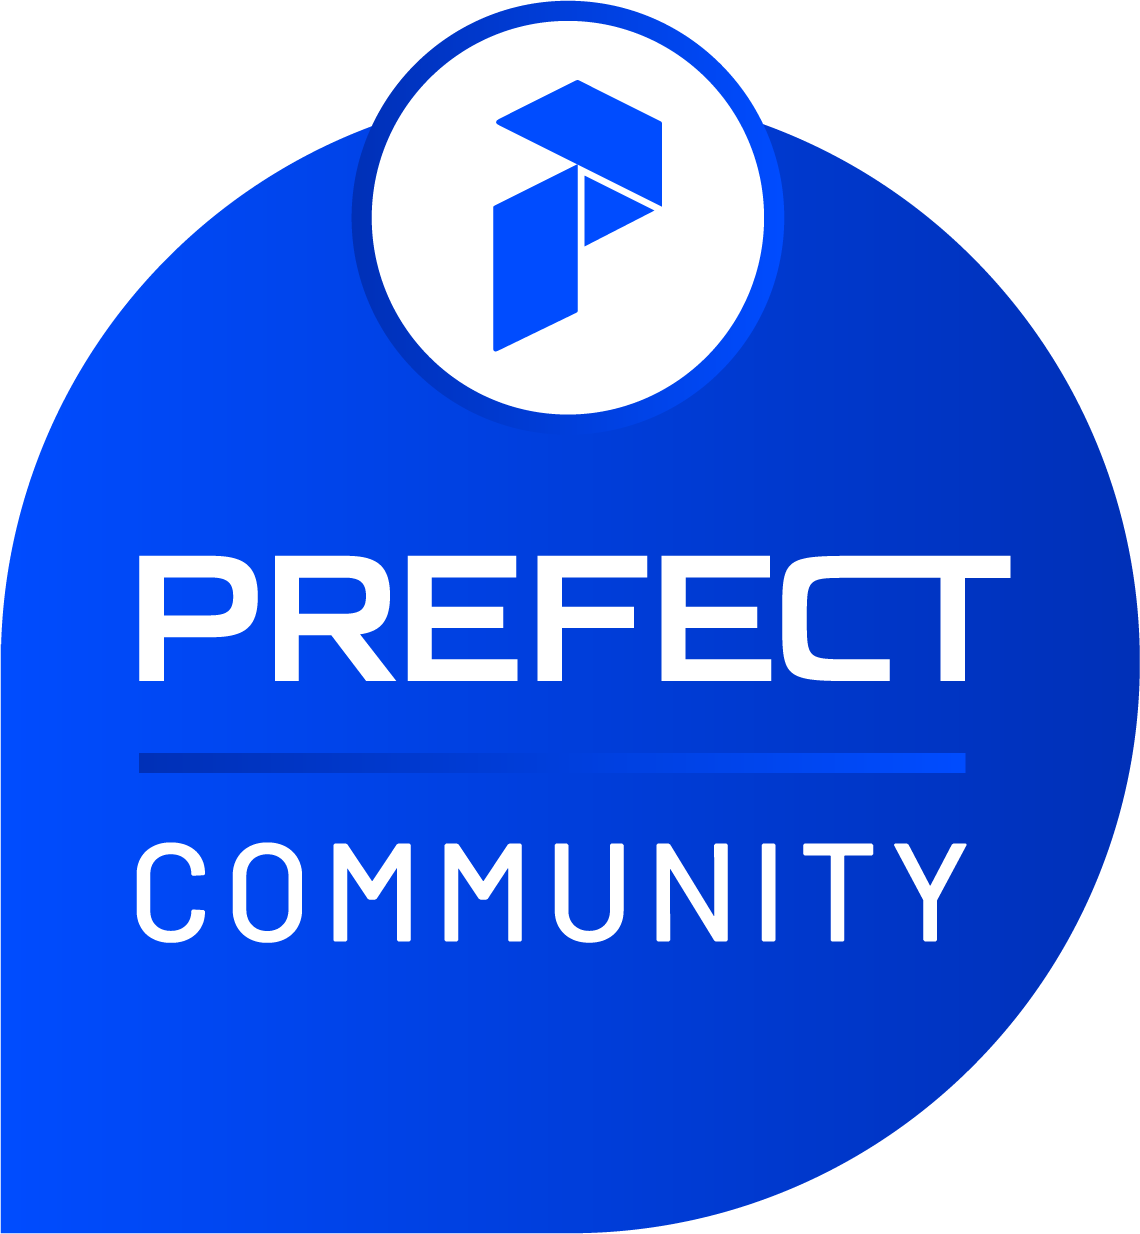 The Prefect Community is here to help.